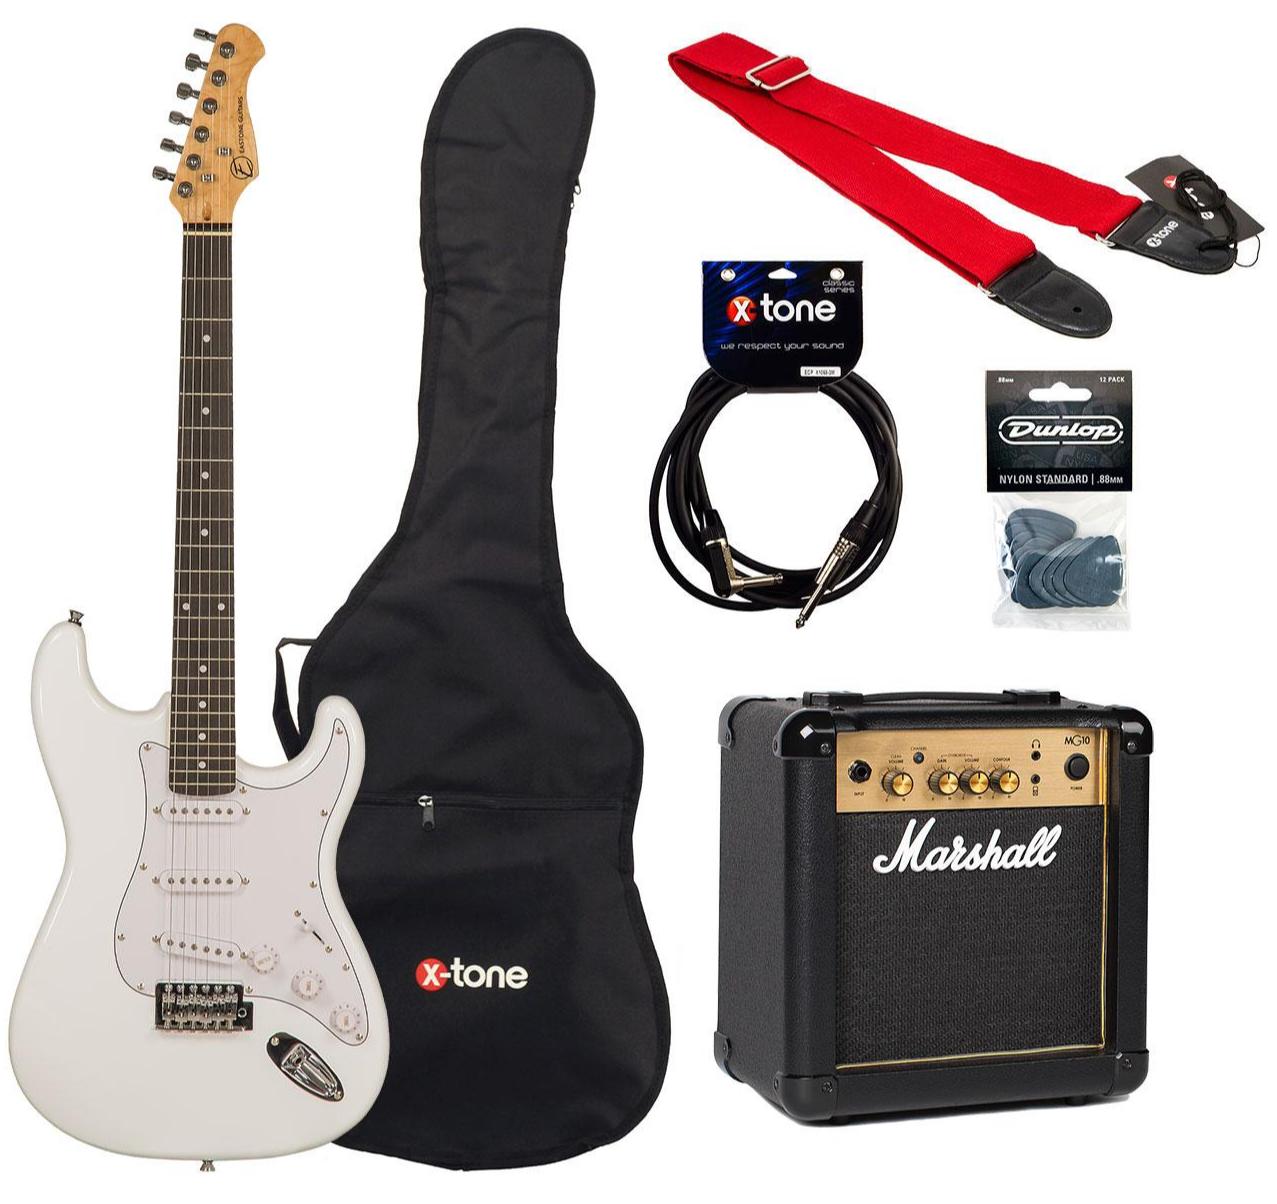 Electric guitar set Eastone STR70 +Marshall MG10G +Accessories - Olympic white